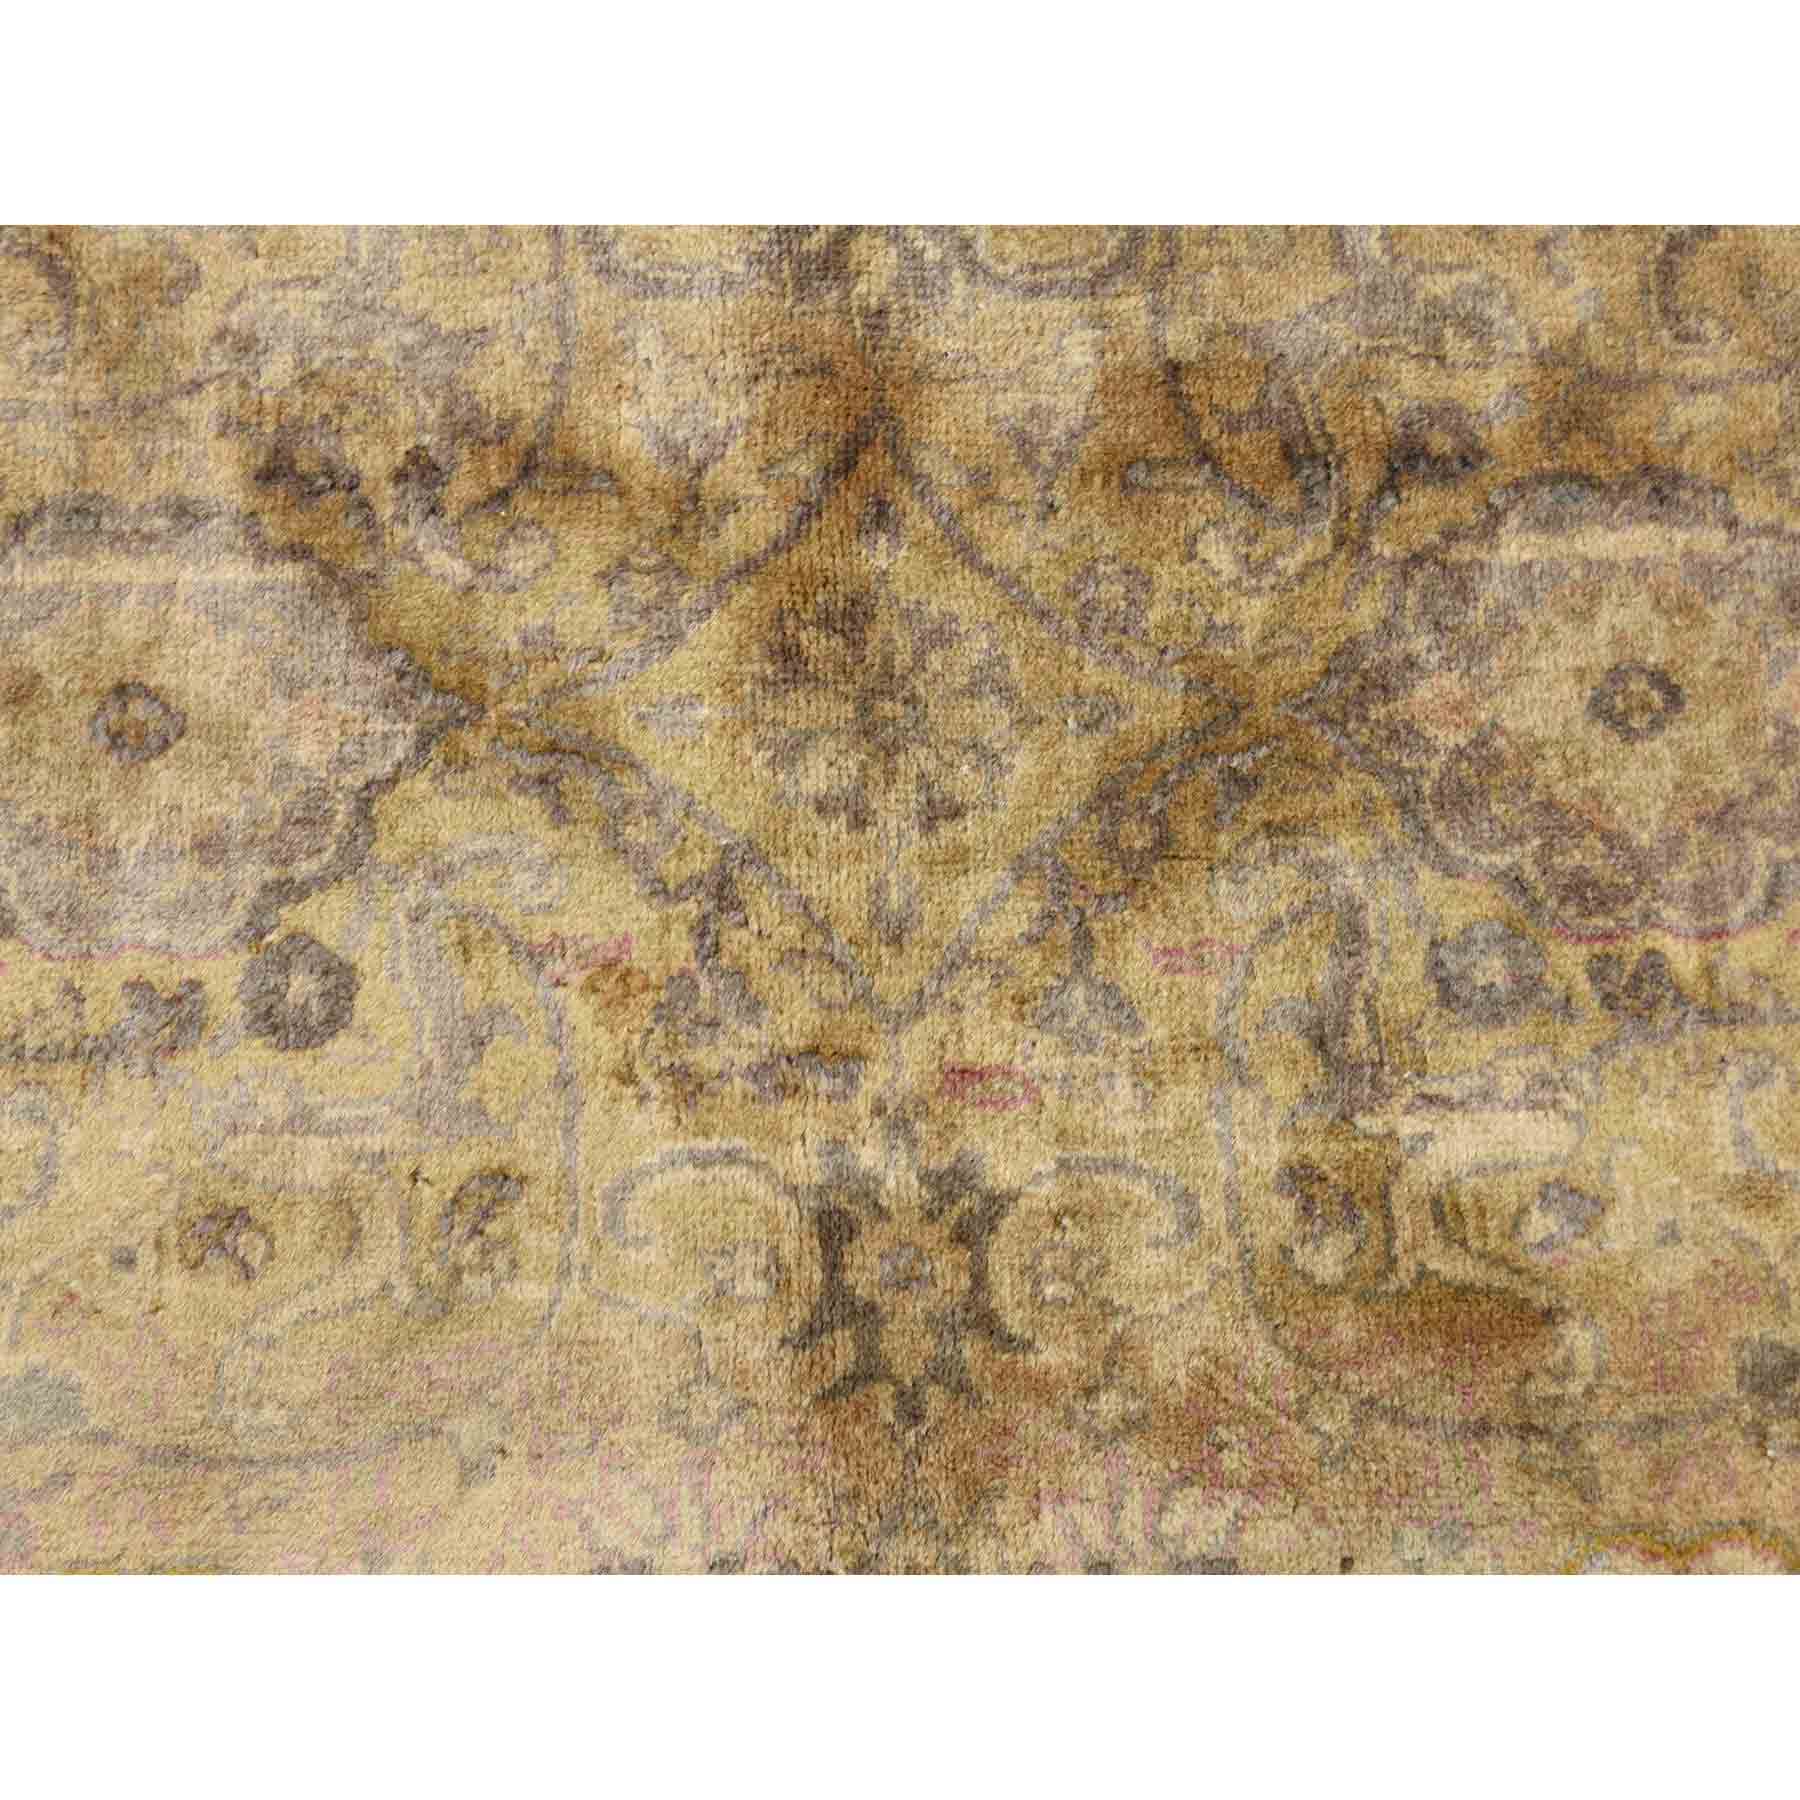 Antique-Hand-Knotted-Rug-207850